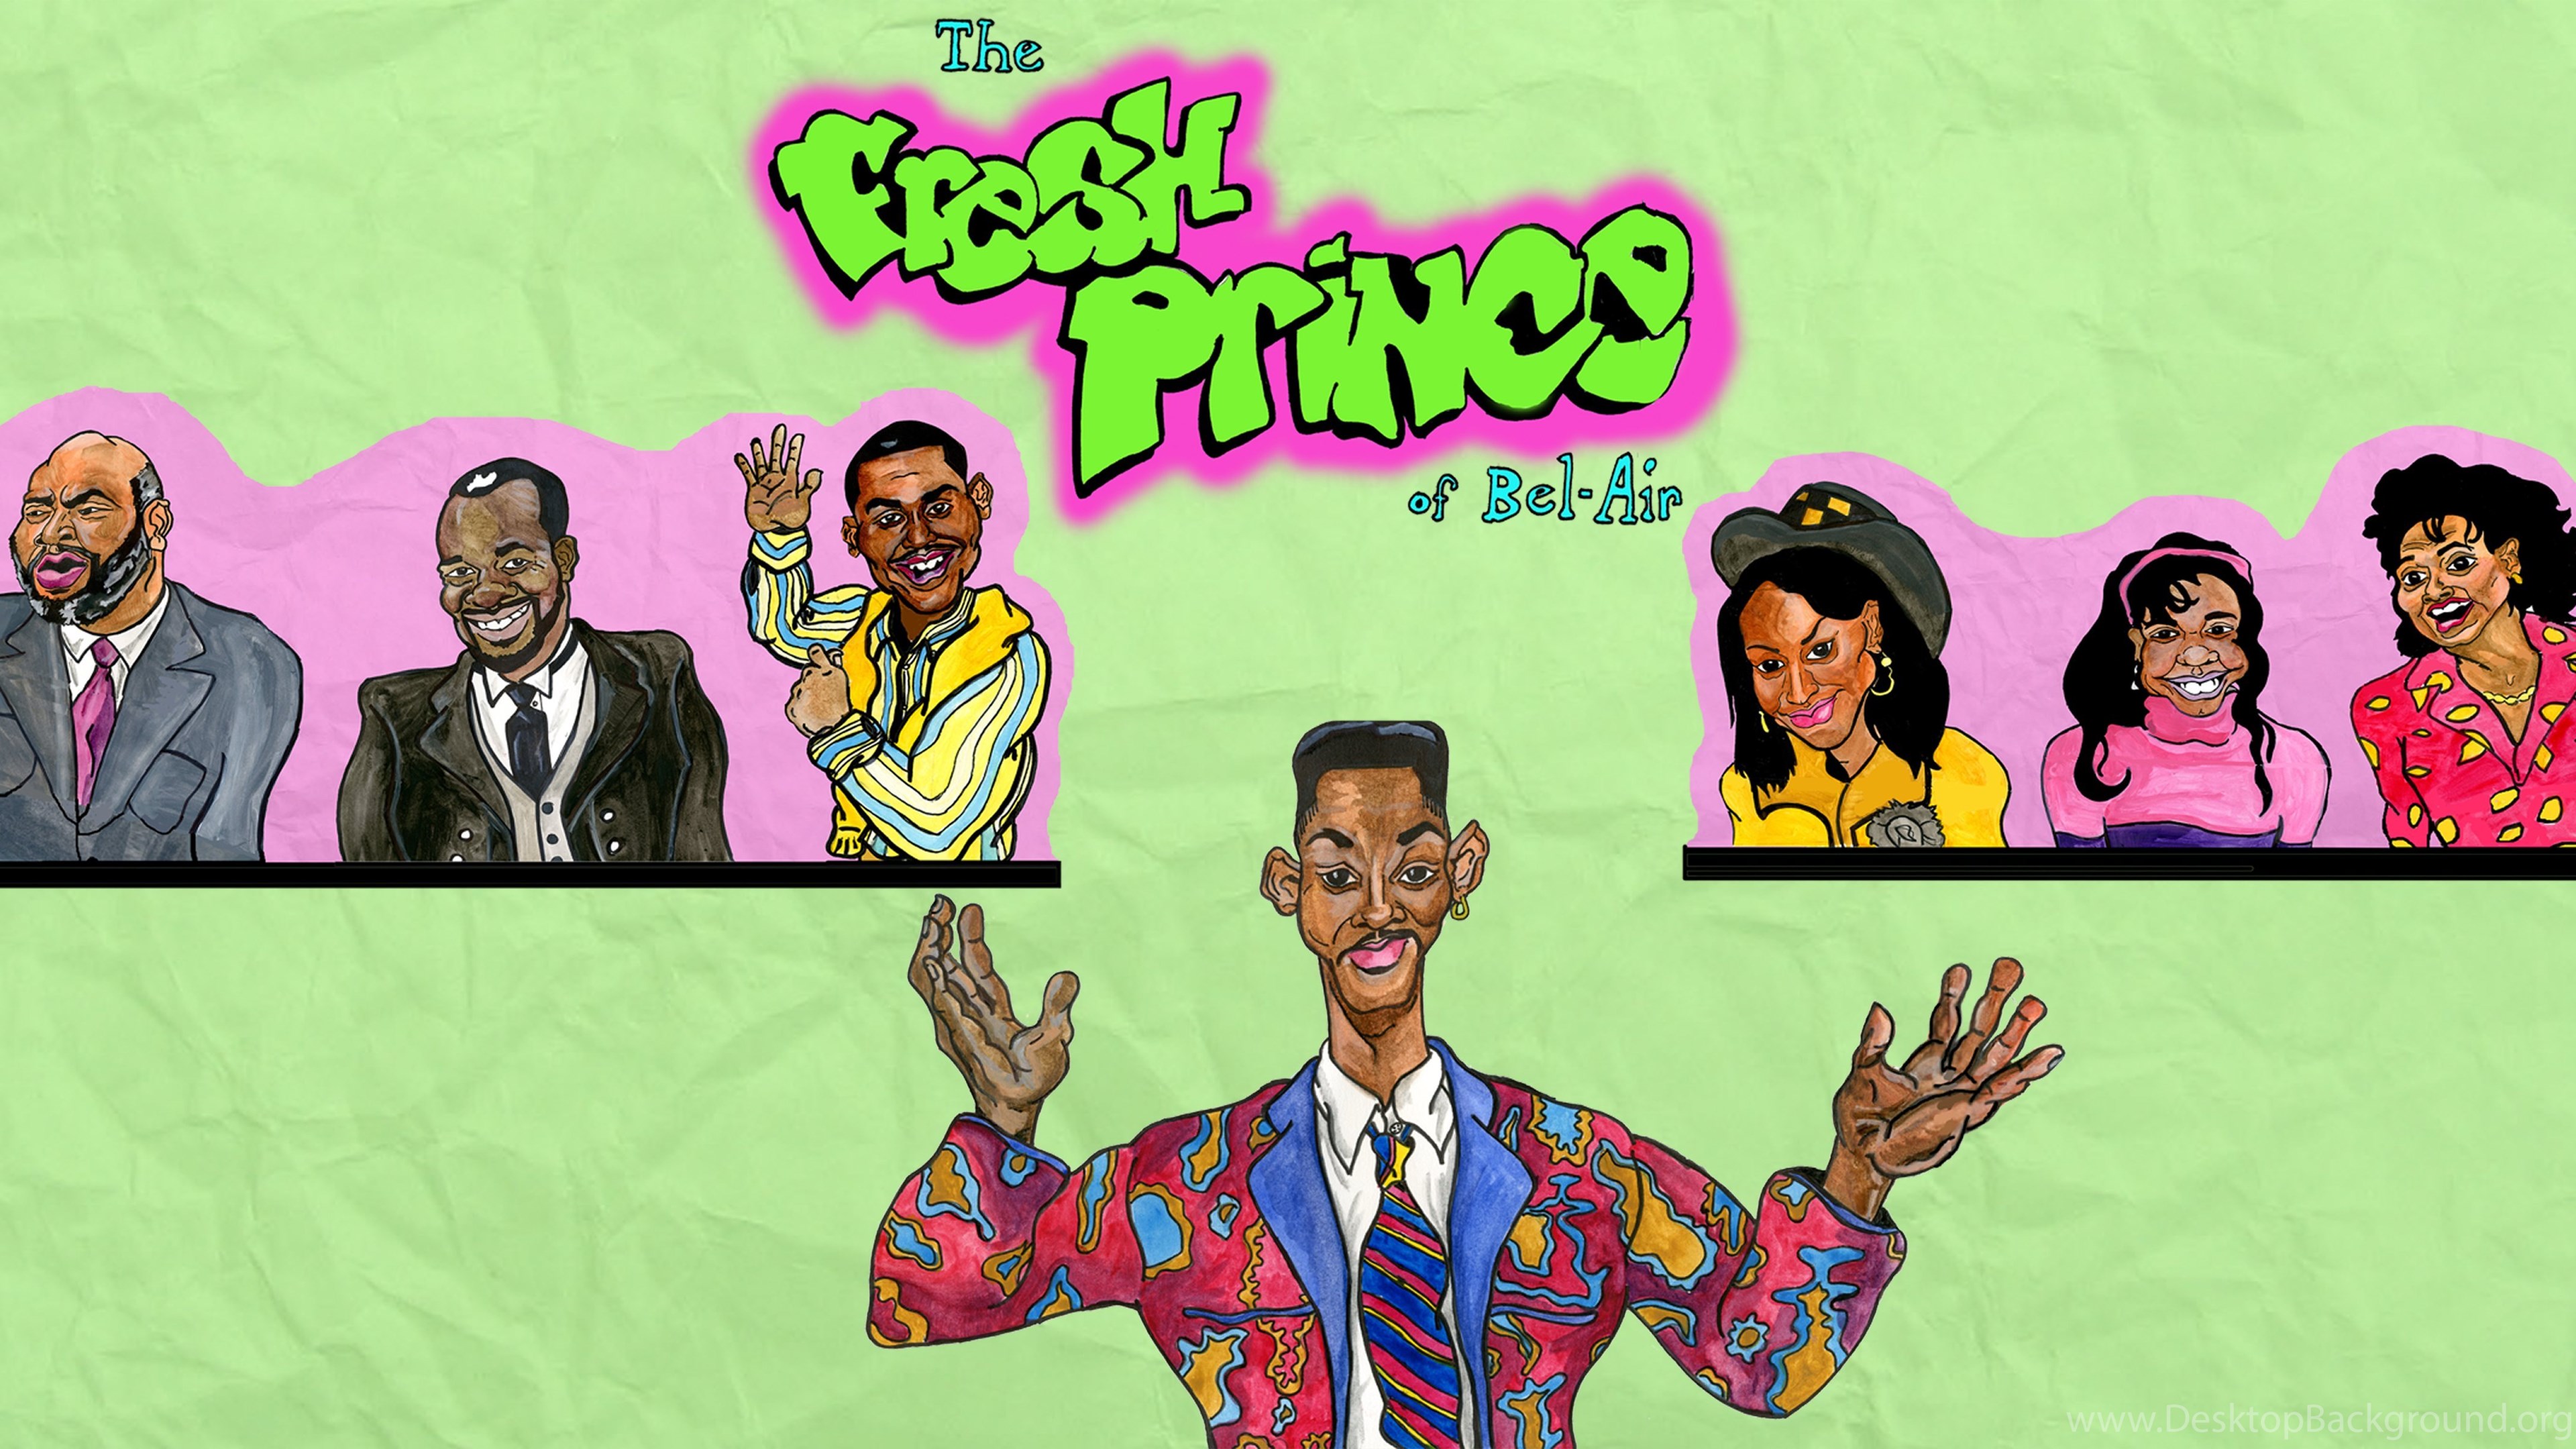 Download Fresh Prince of Bel Air Comedy Sitcom Series Television Will Smith...